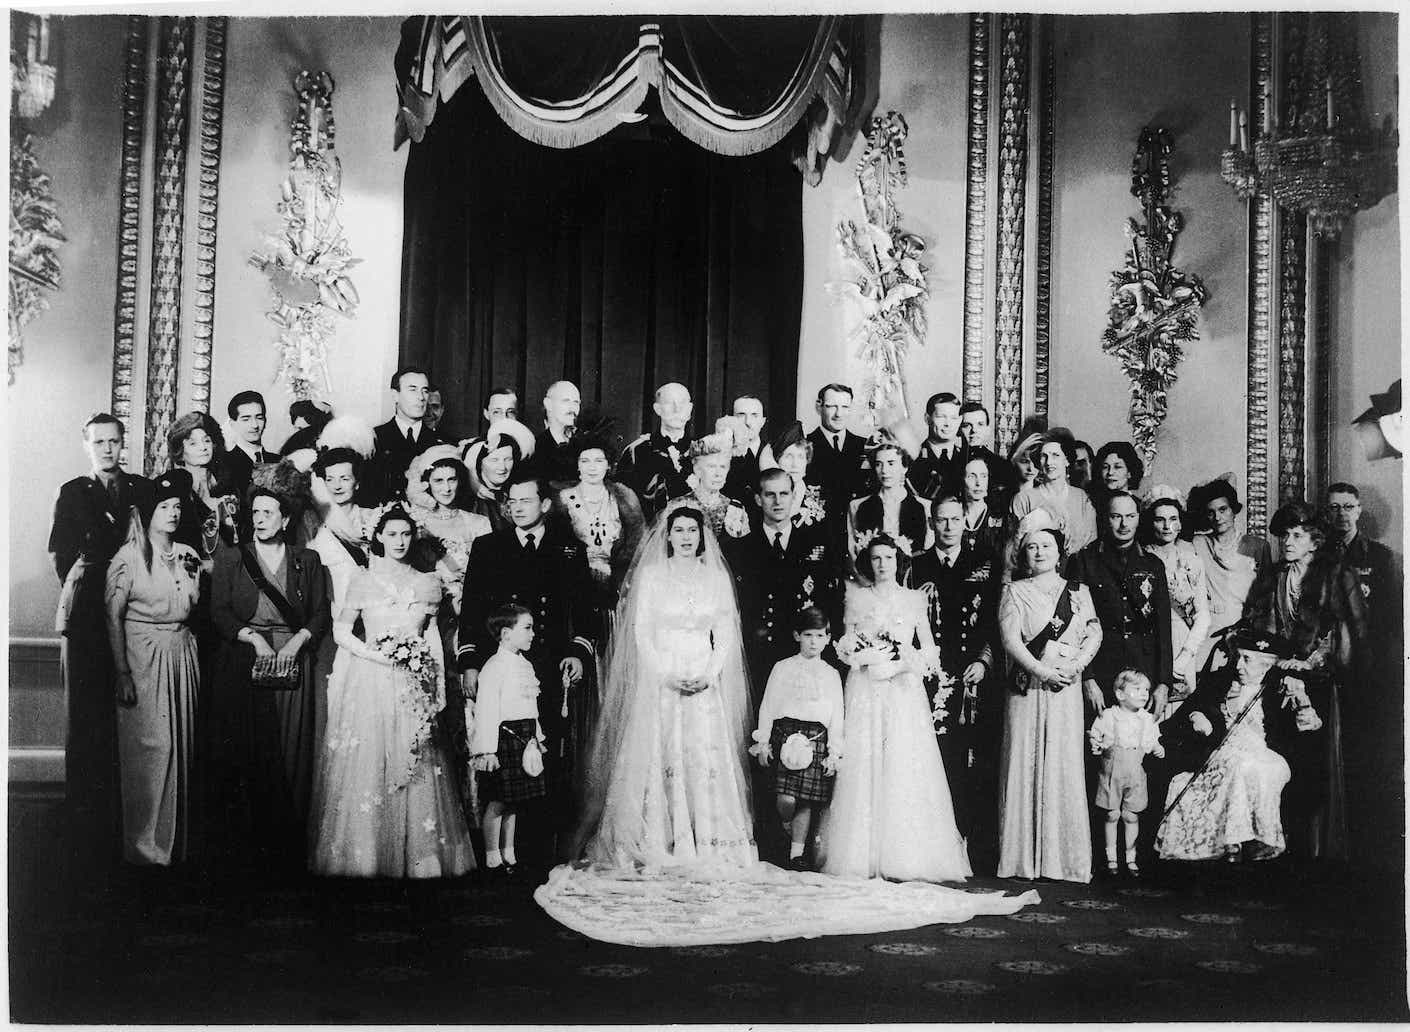 Wedding of Elizabeth II and Lt. Philip Mountbatten: the queen stands in a white dress in front of a large wedding party.